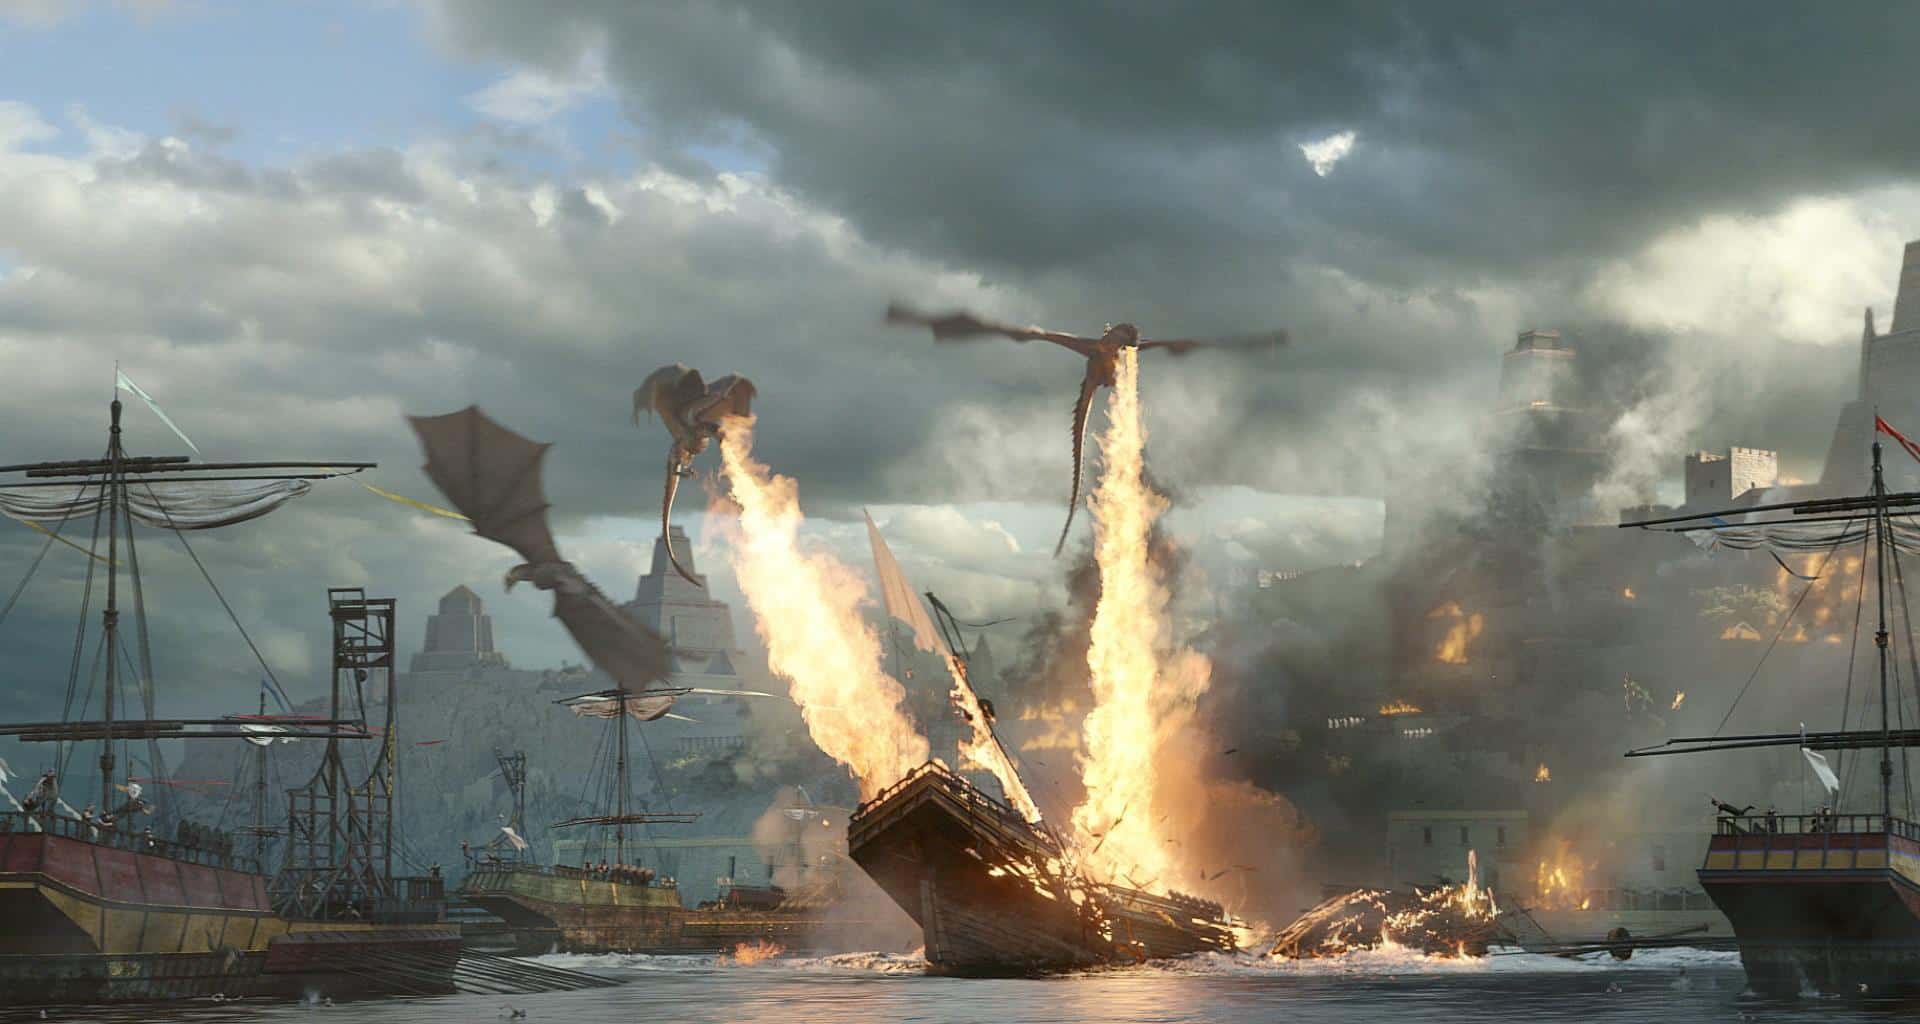 Game Of Thrones' Amazing Battle Sequence, But Without All The CGI